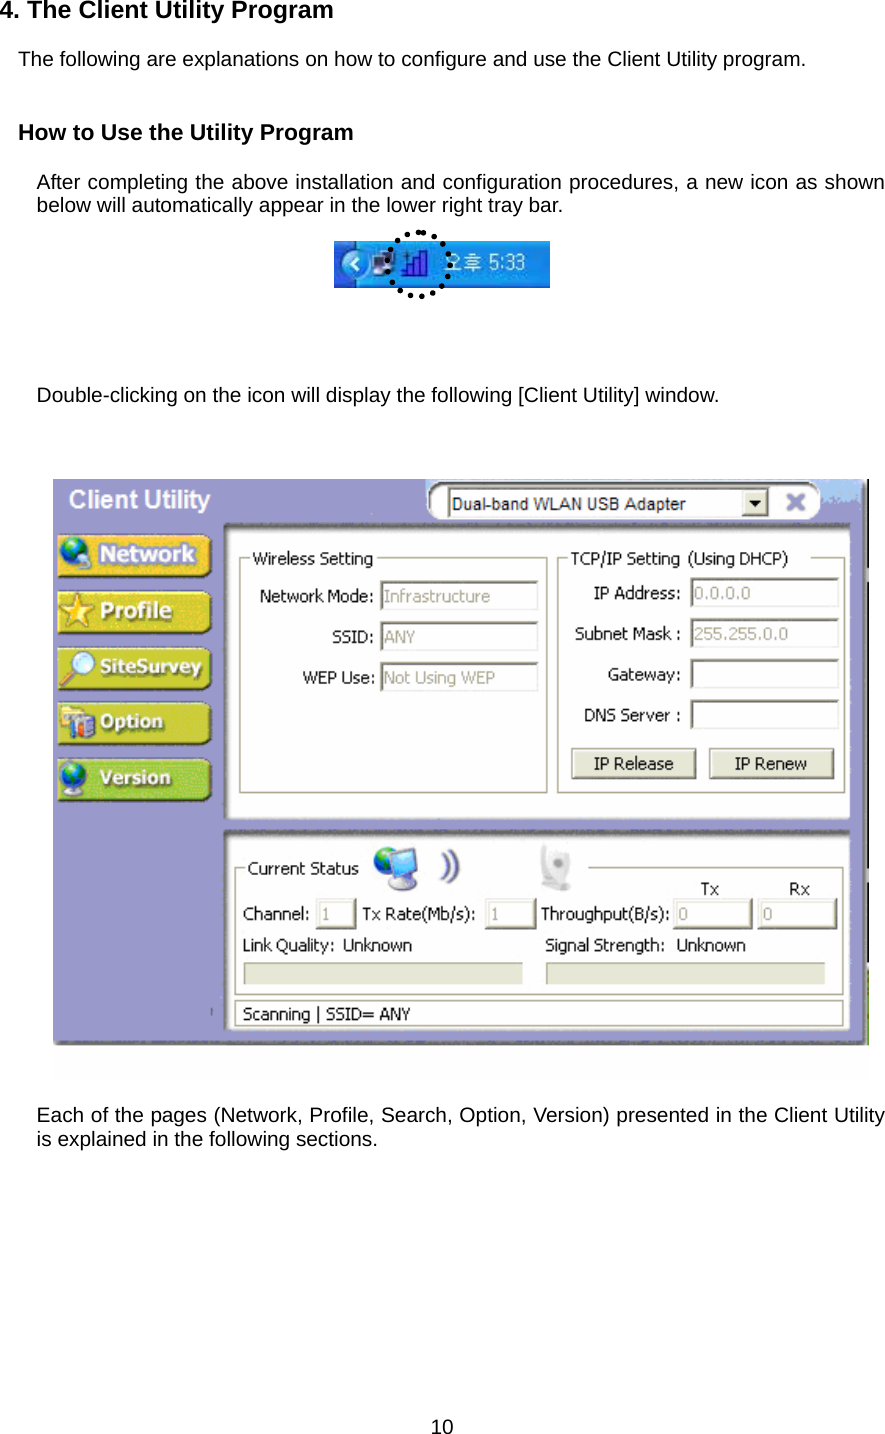  10 4. The Client Utility Program  The following are explanations on how to configure and use the Client Utility program.   How to Use the Utility Program  After completing the above installation and configuration procedures, a new icon as shown below will automatically appear in the lower right tray bar.       Double-clicking on the icon will display the following [Client Utility] window.      Each of the pages (Network, Profile, Search, Option, Version) presented in the Client Utility is explained in the following sections.         